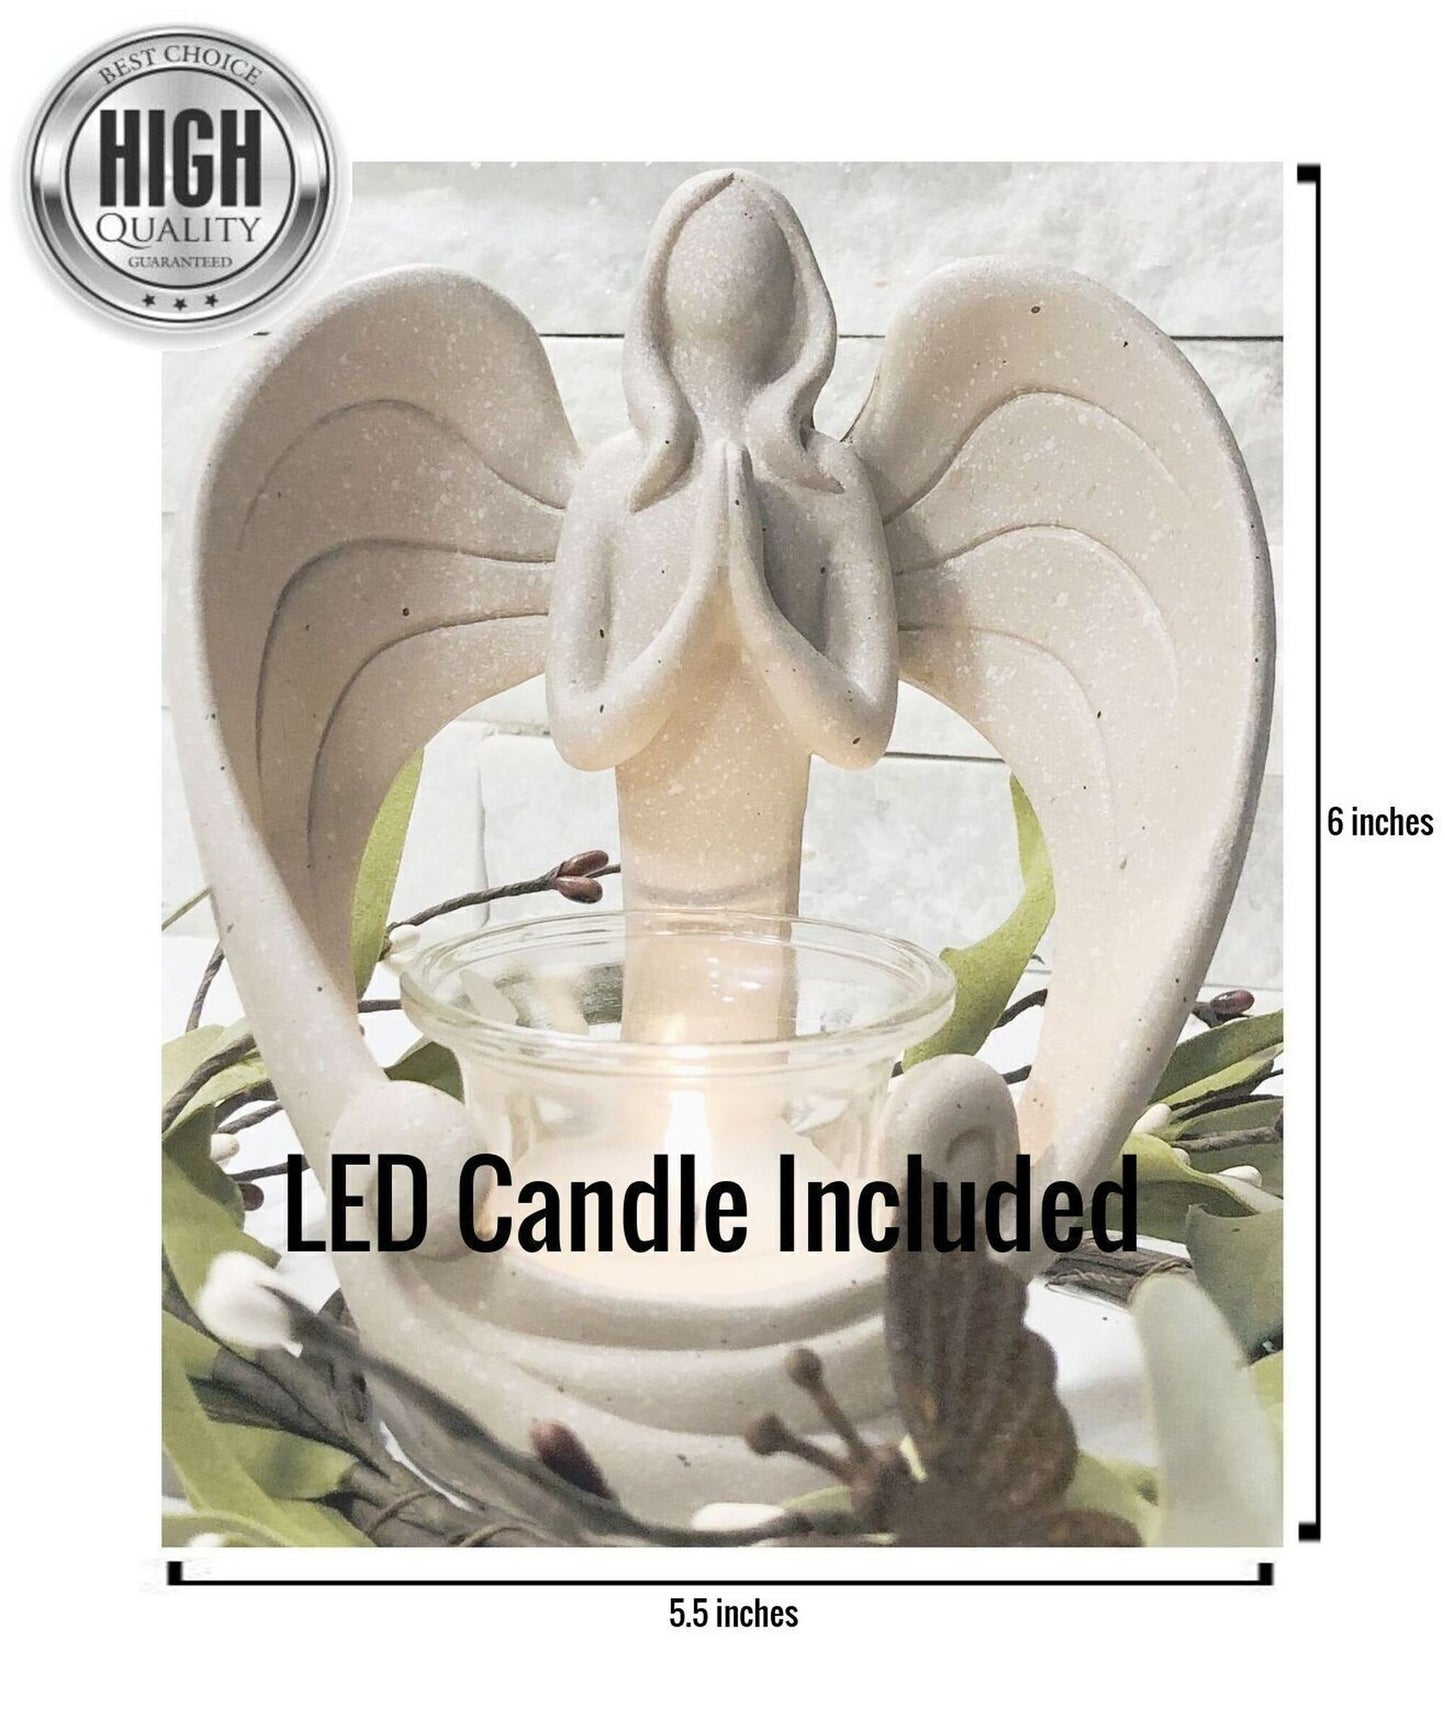 Angel Memorial Candleholder Sympathy Gift with LED Tealight Candle